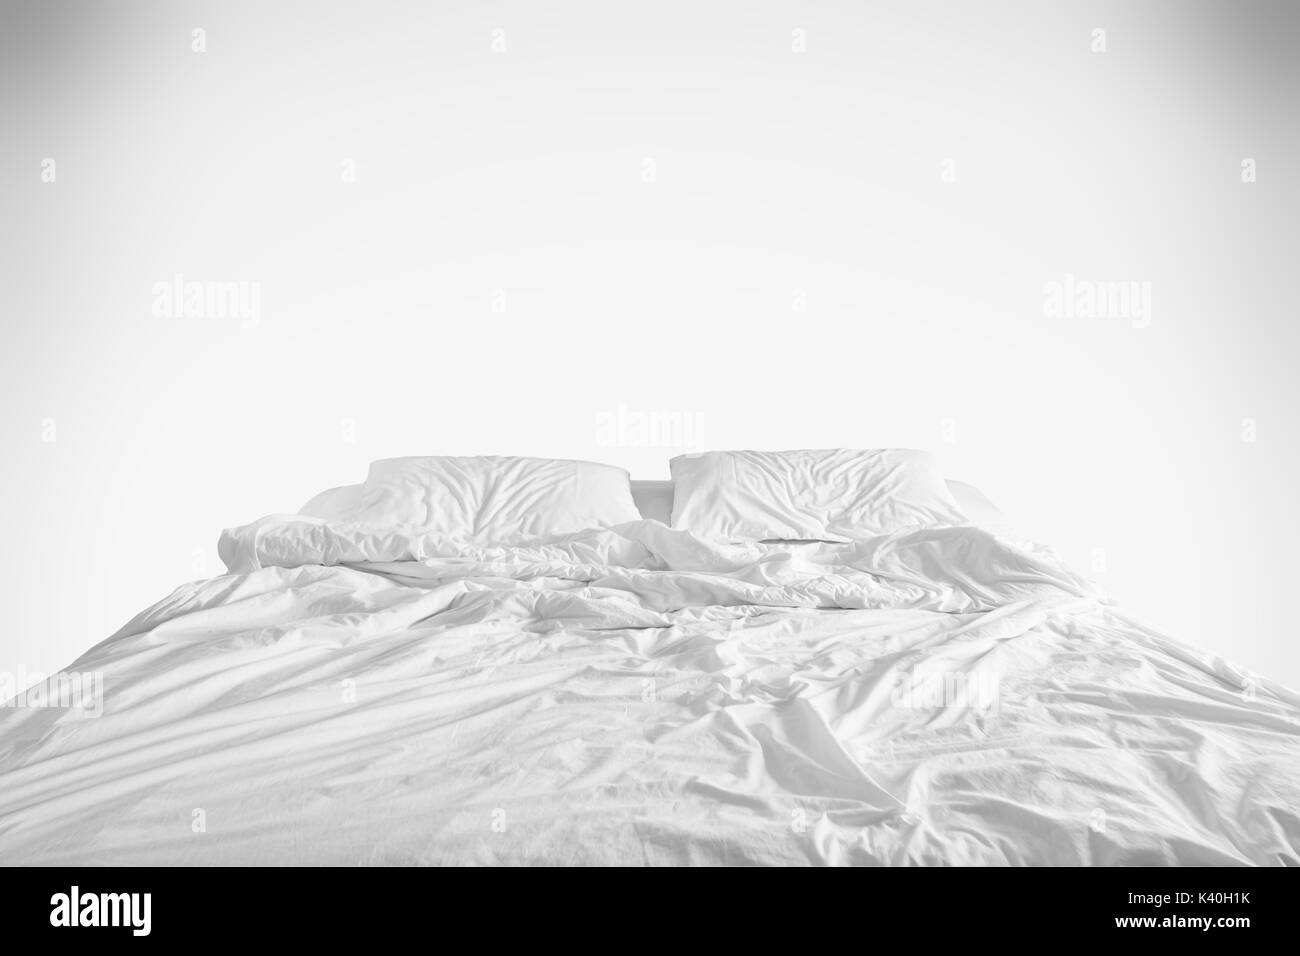 unmade bed with crumpled bed sheet, a blanket and pillows after comfort duvet sleep waking up in the morning on white background Stock Photo